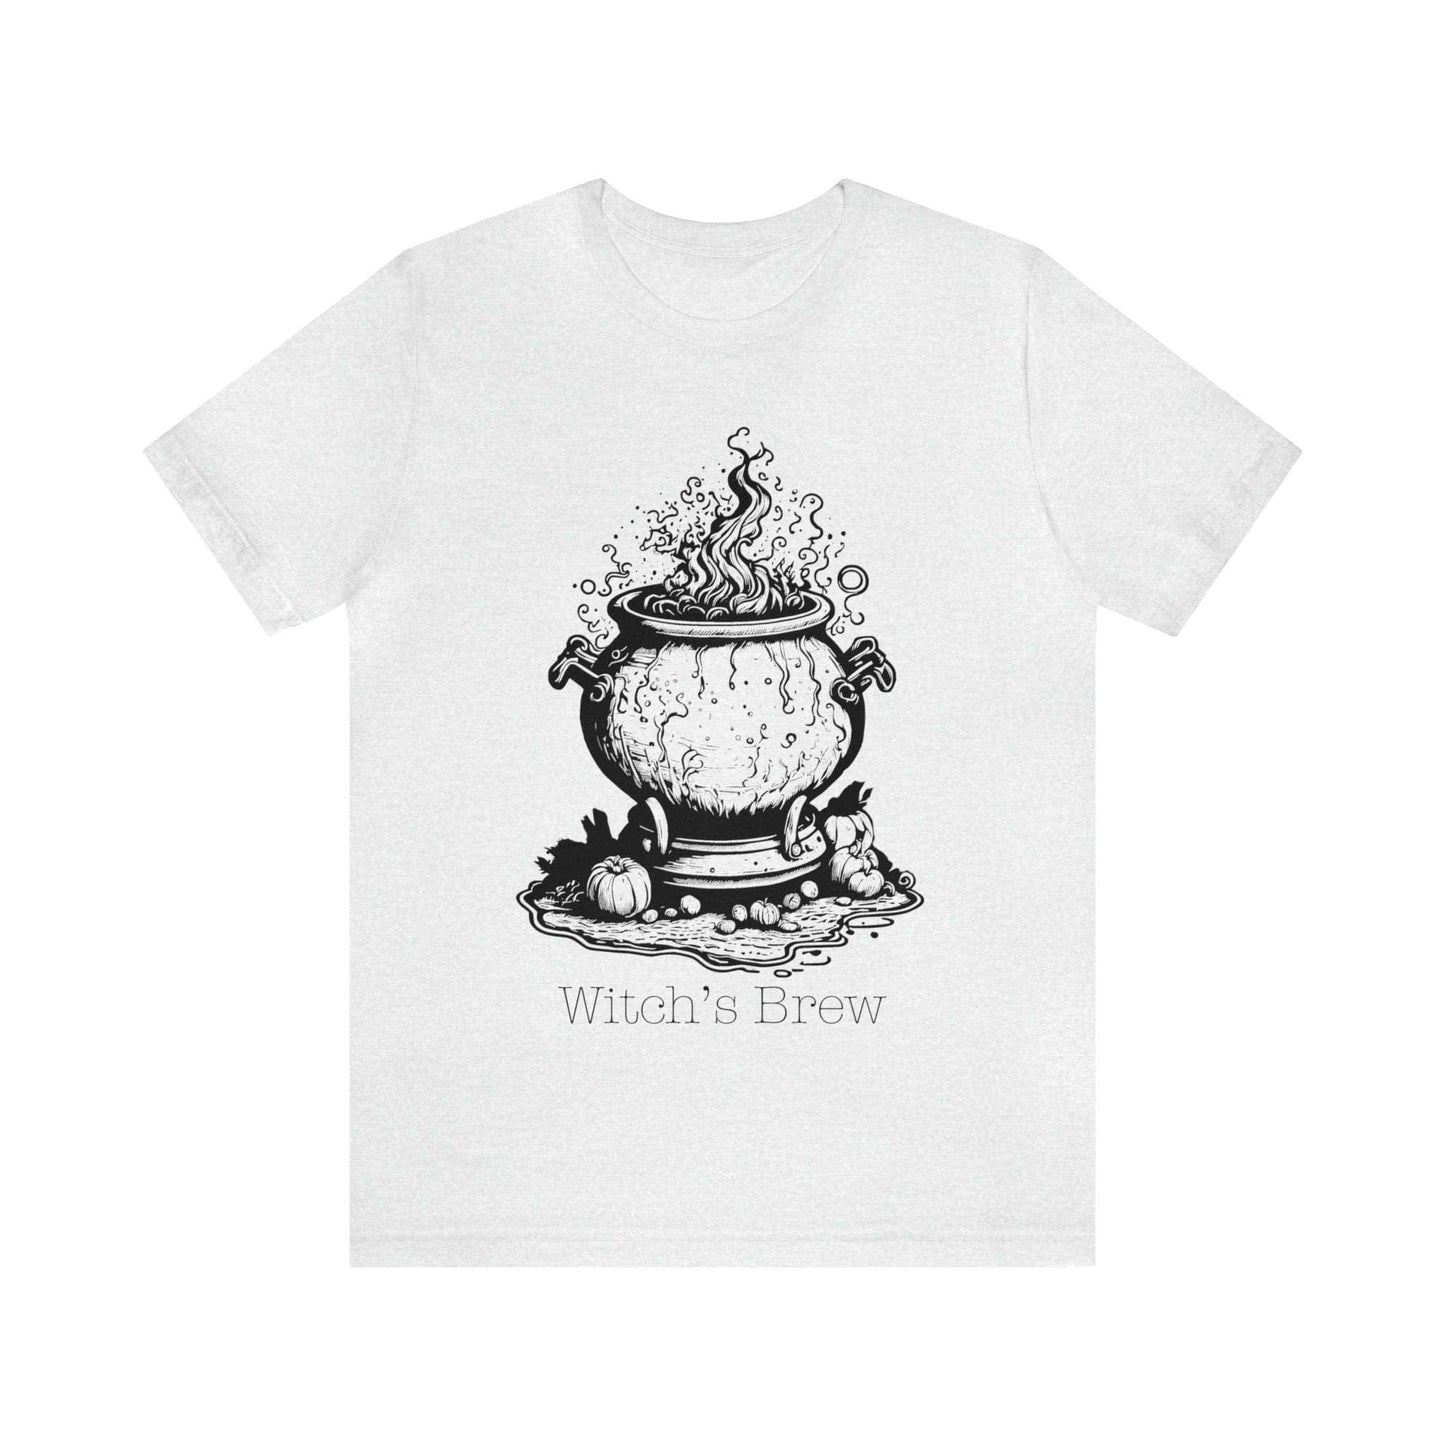 Witch's Brew Tee from Fierce Fusion